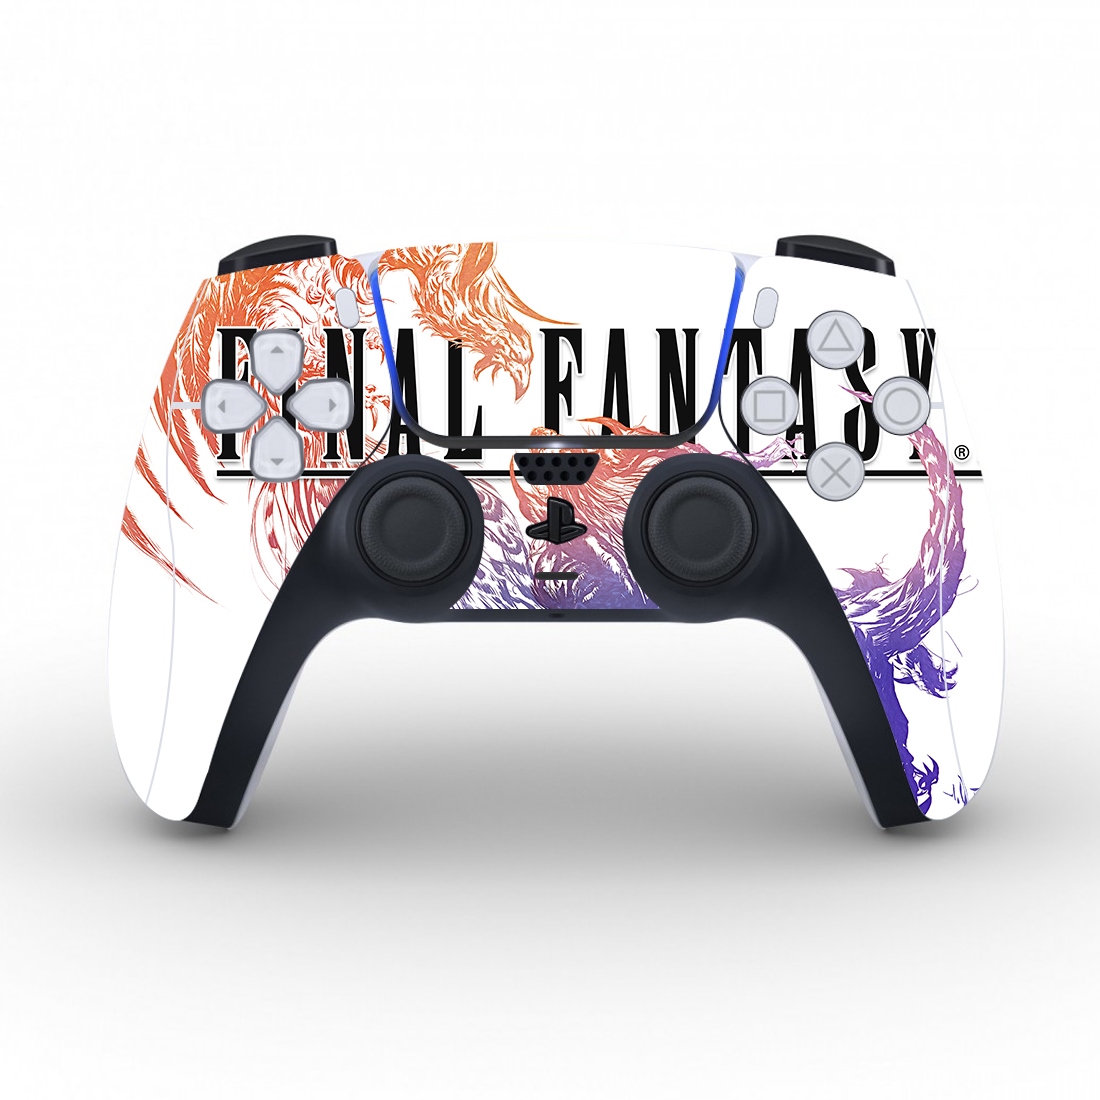 Final Fantasy 16 Protective Cover Sticker For PS5 Controller Skin For PS5 Gamepad Decal Skin Sticker Vinyl